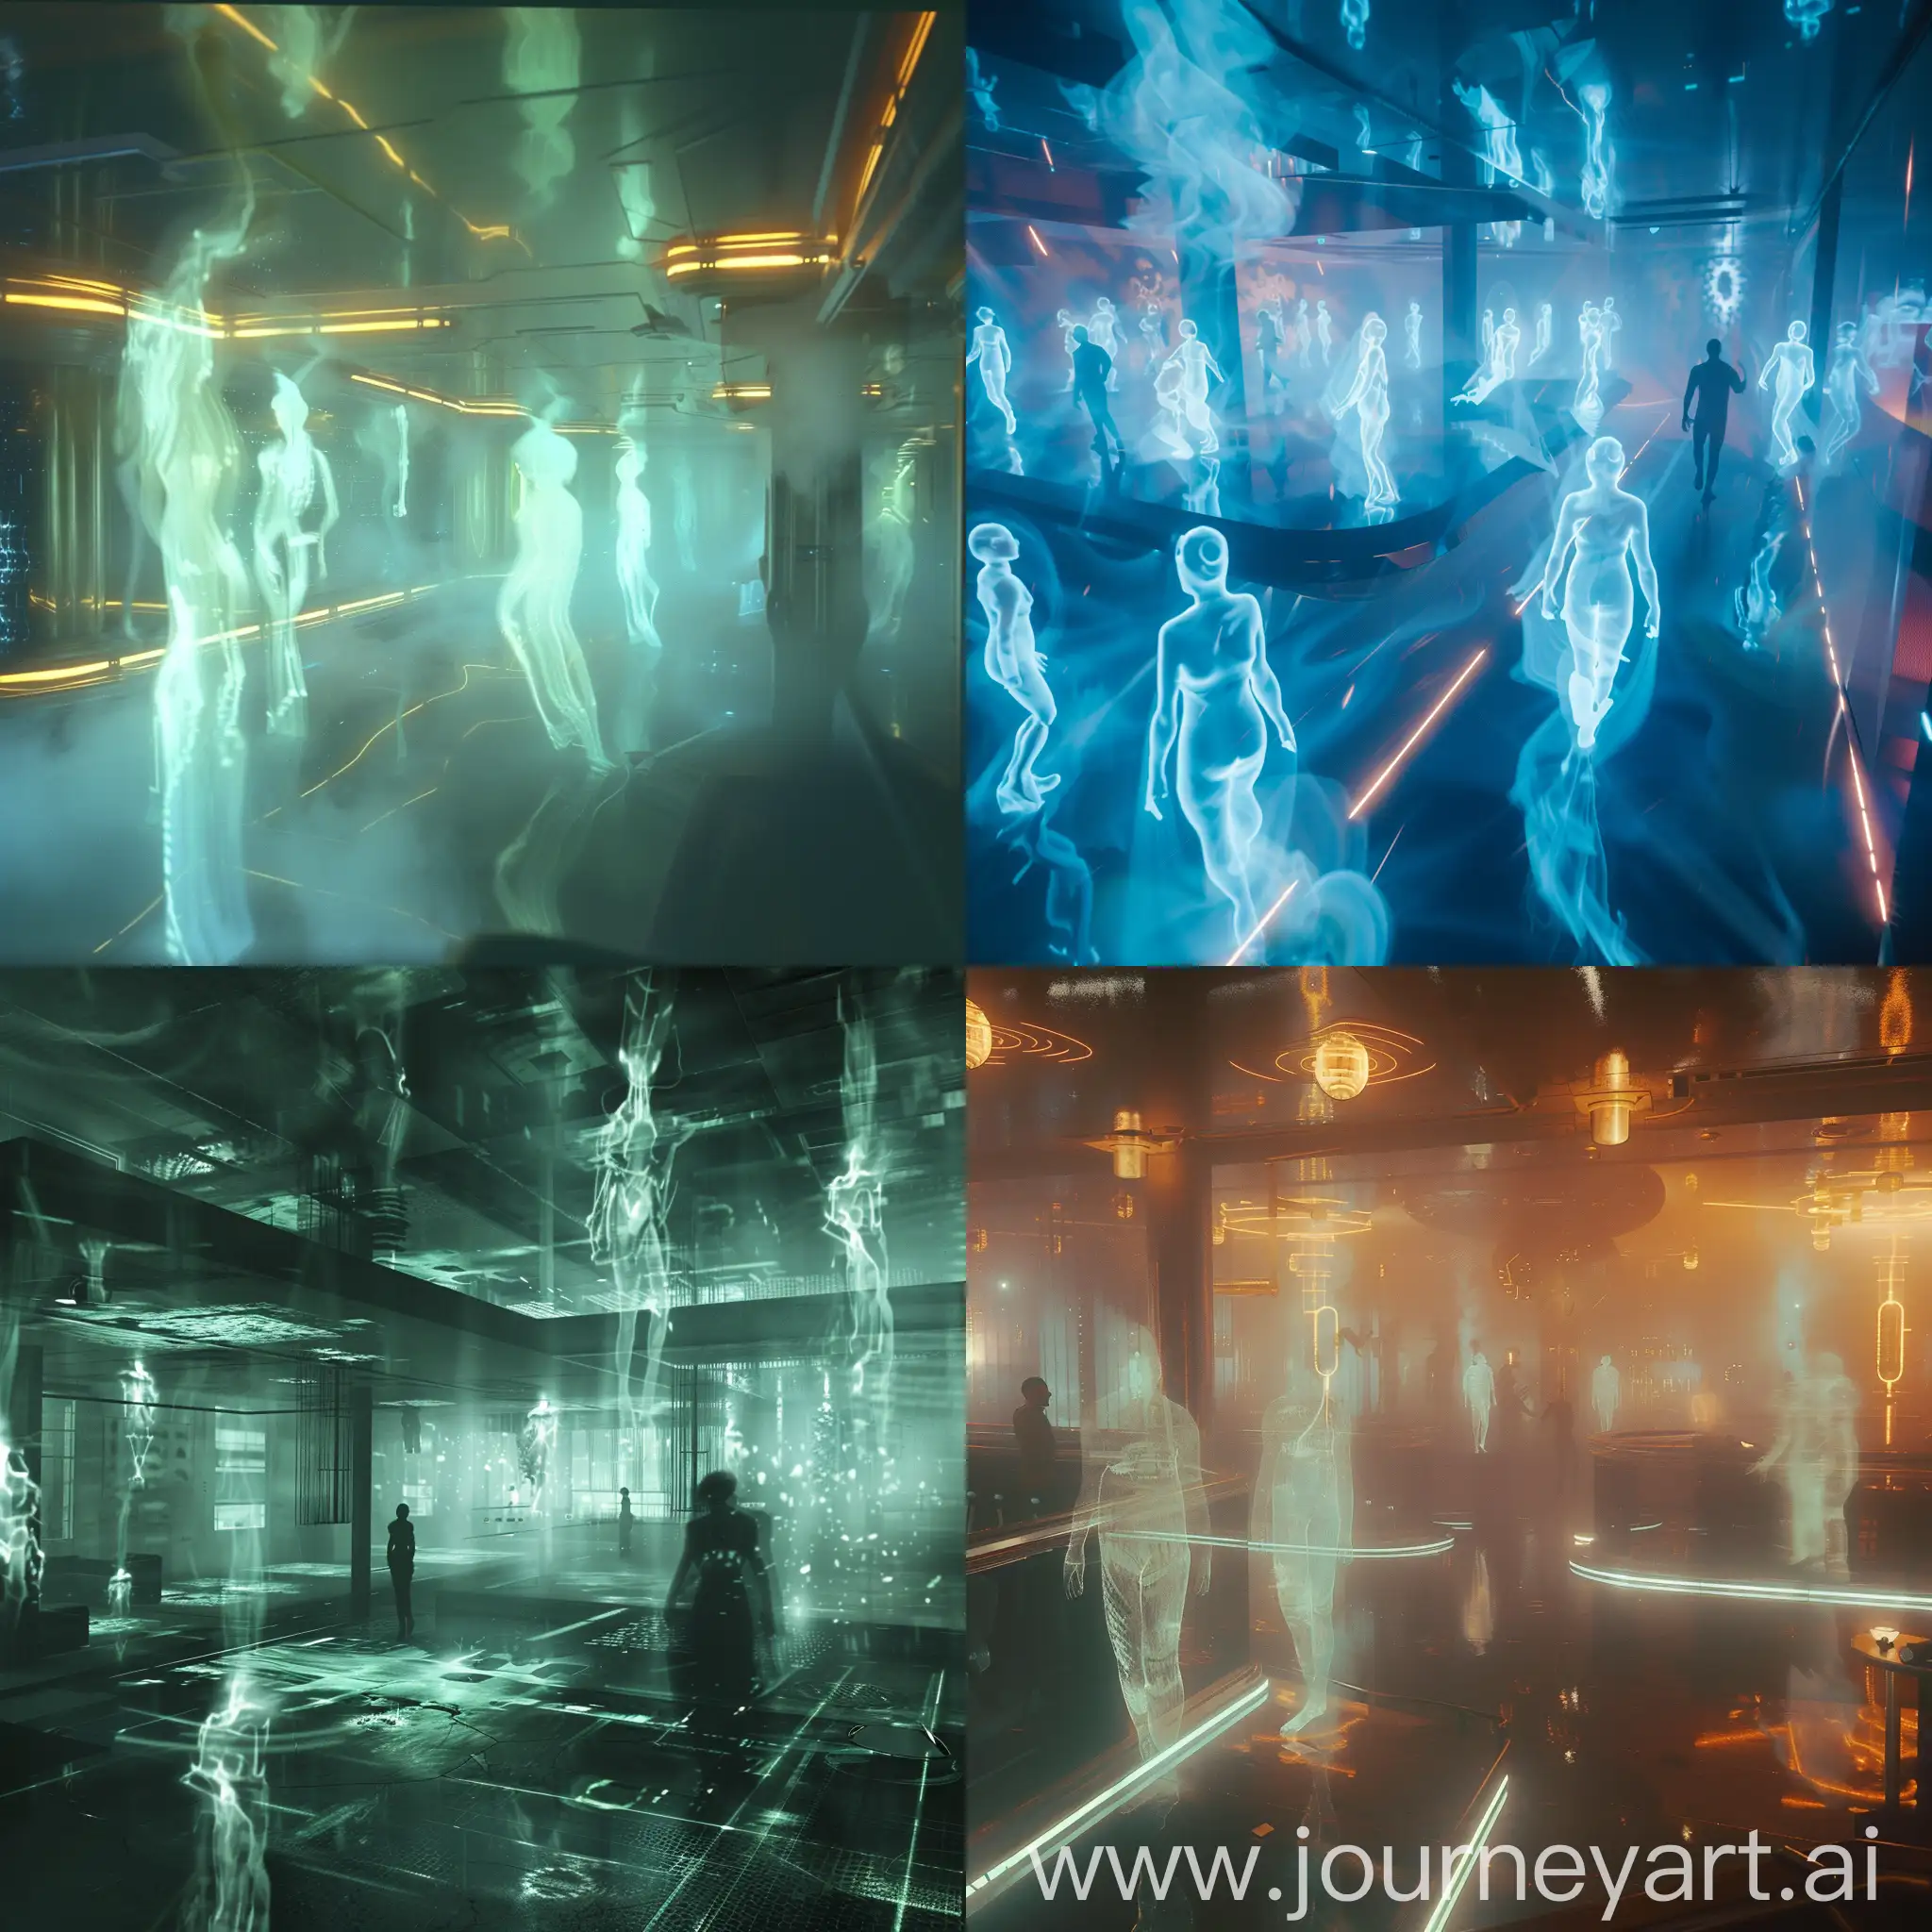 a dimly lit room with a futuristic ambiance. the air is filled with an ethereal glow as hologramic figures flicker and dance around the space. the room is mysterious and filled with anticipation.